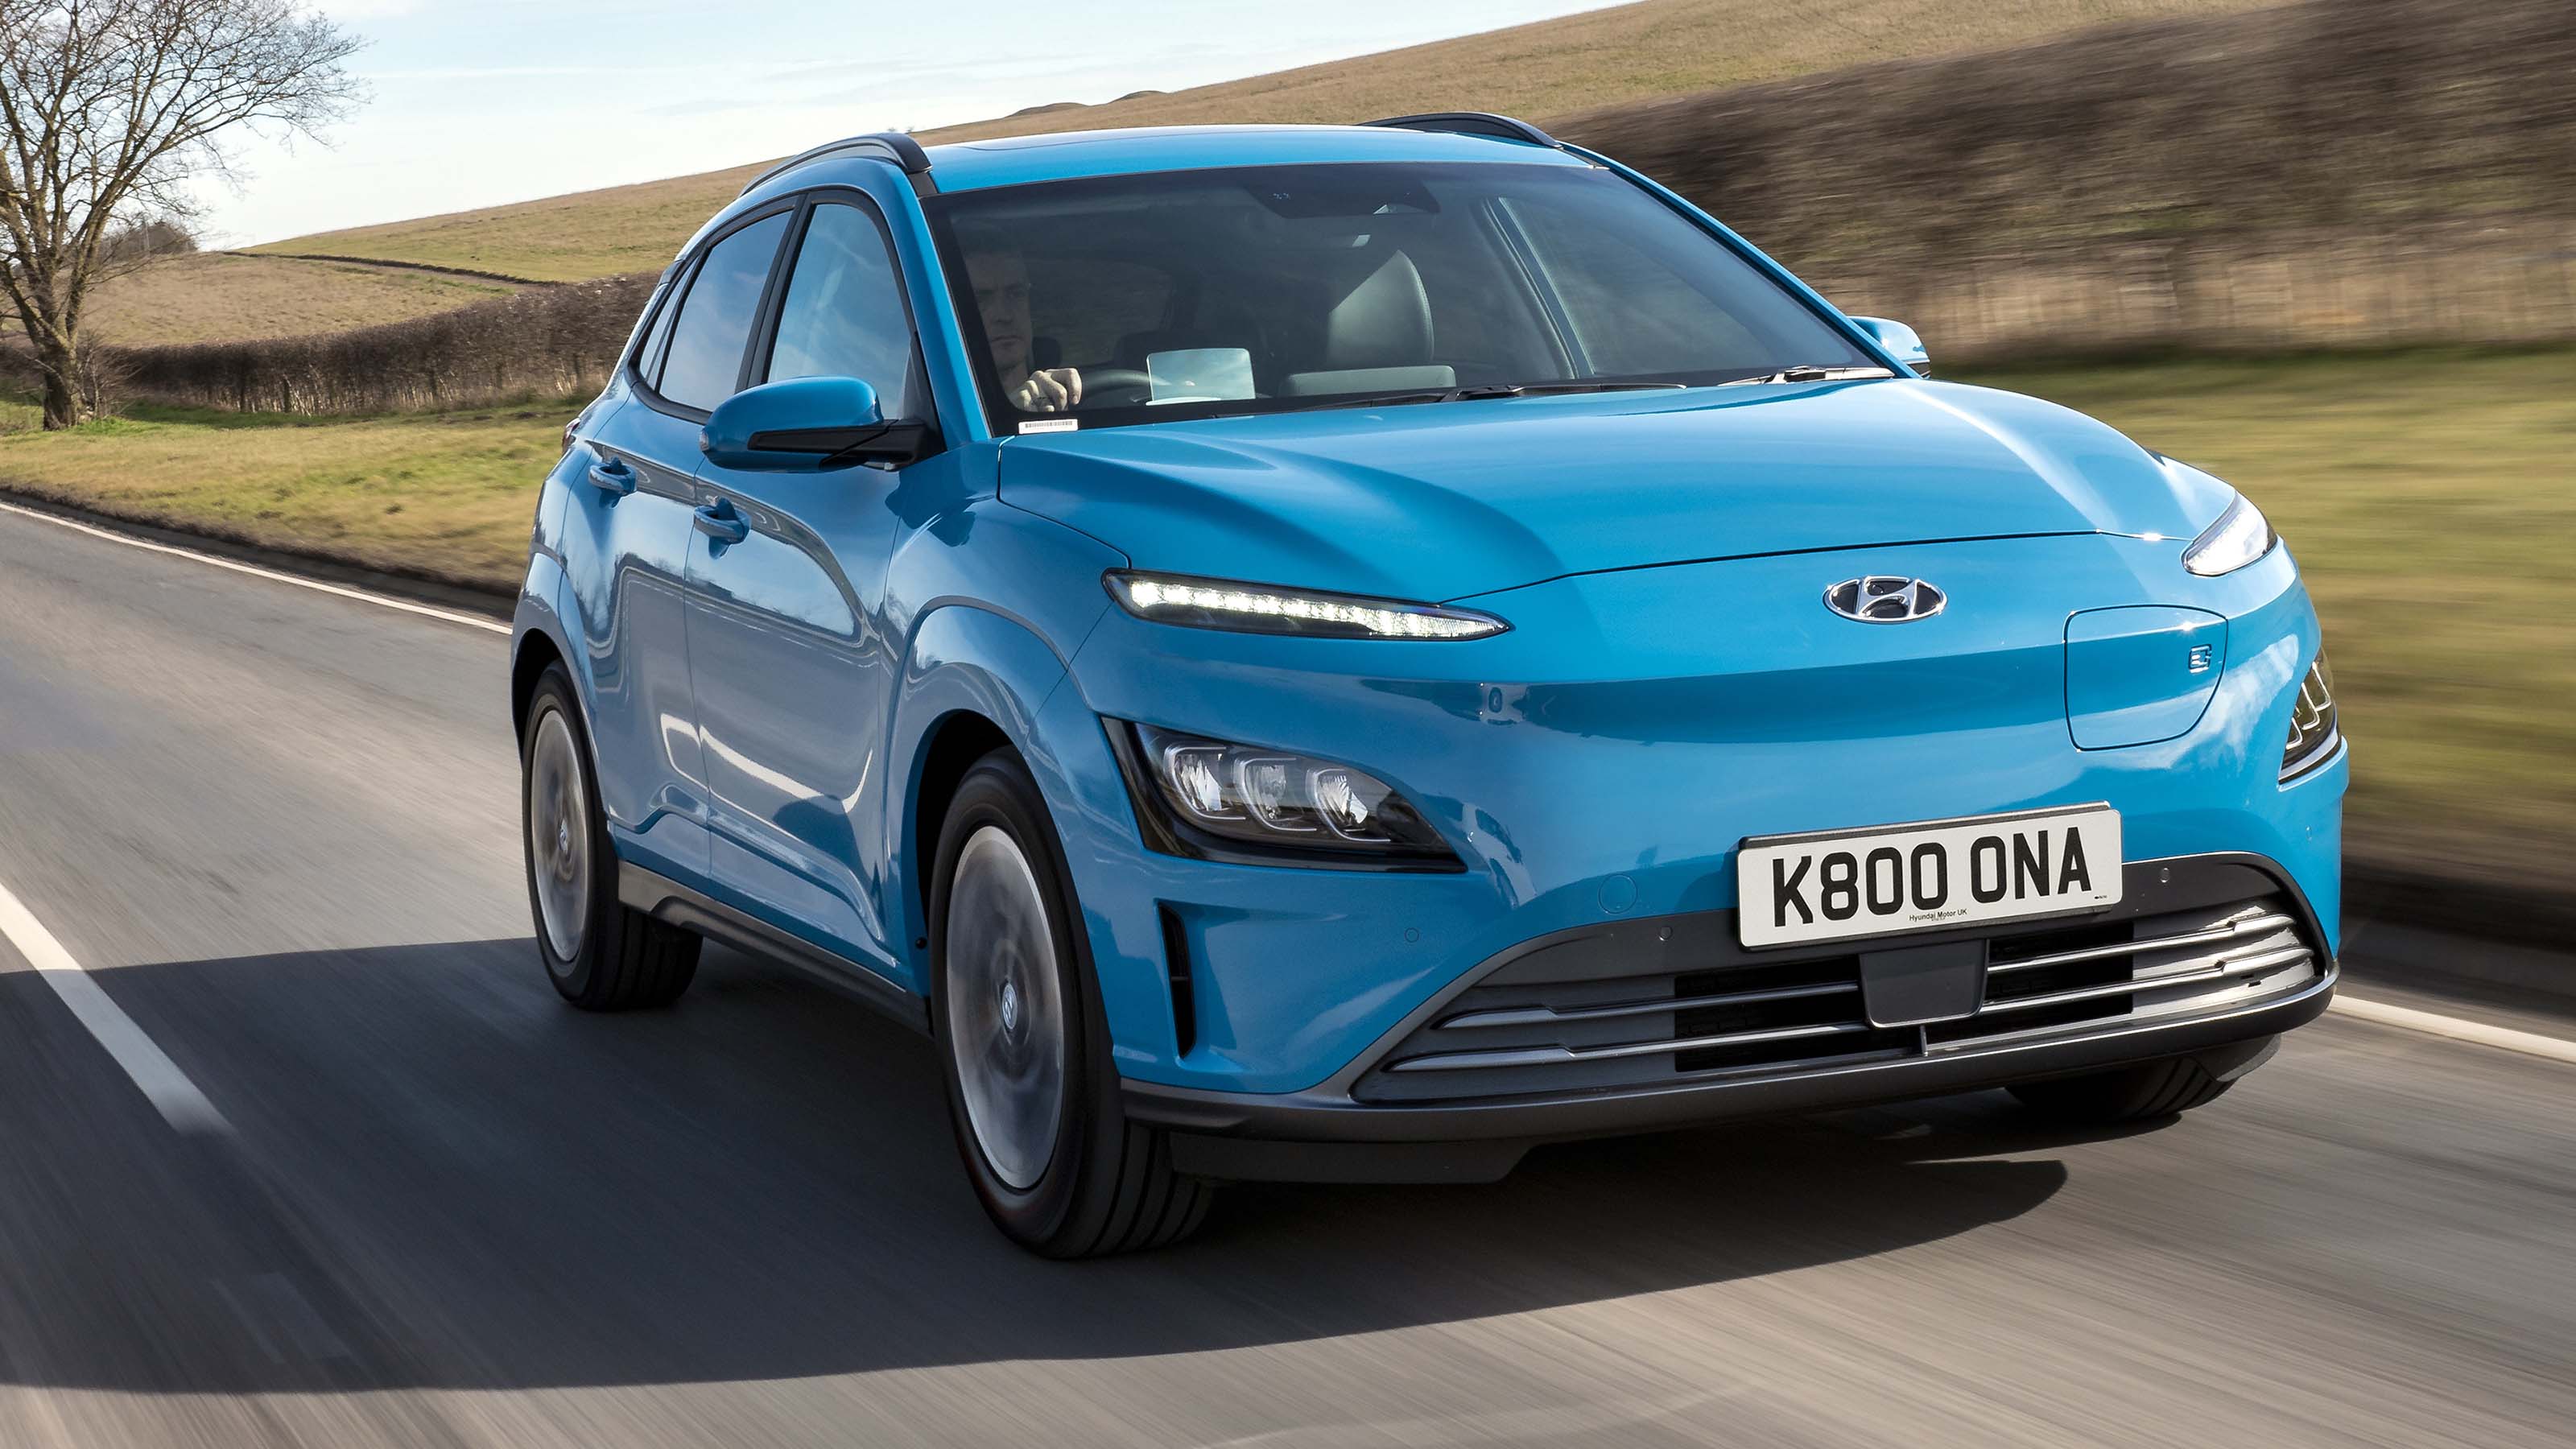 New 2021 Hyundai Kona Electric: prices, specification and on-sale date